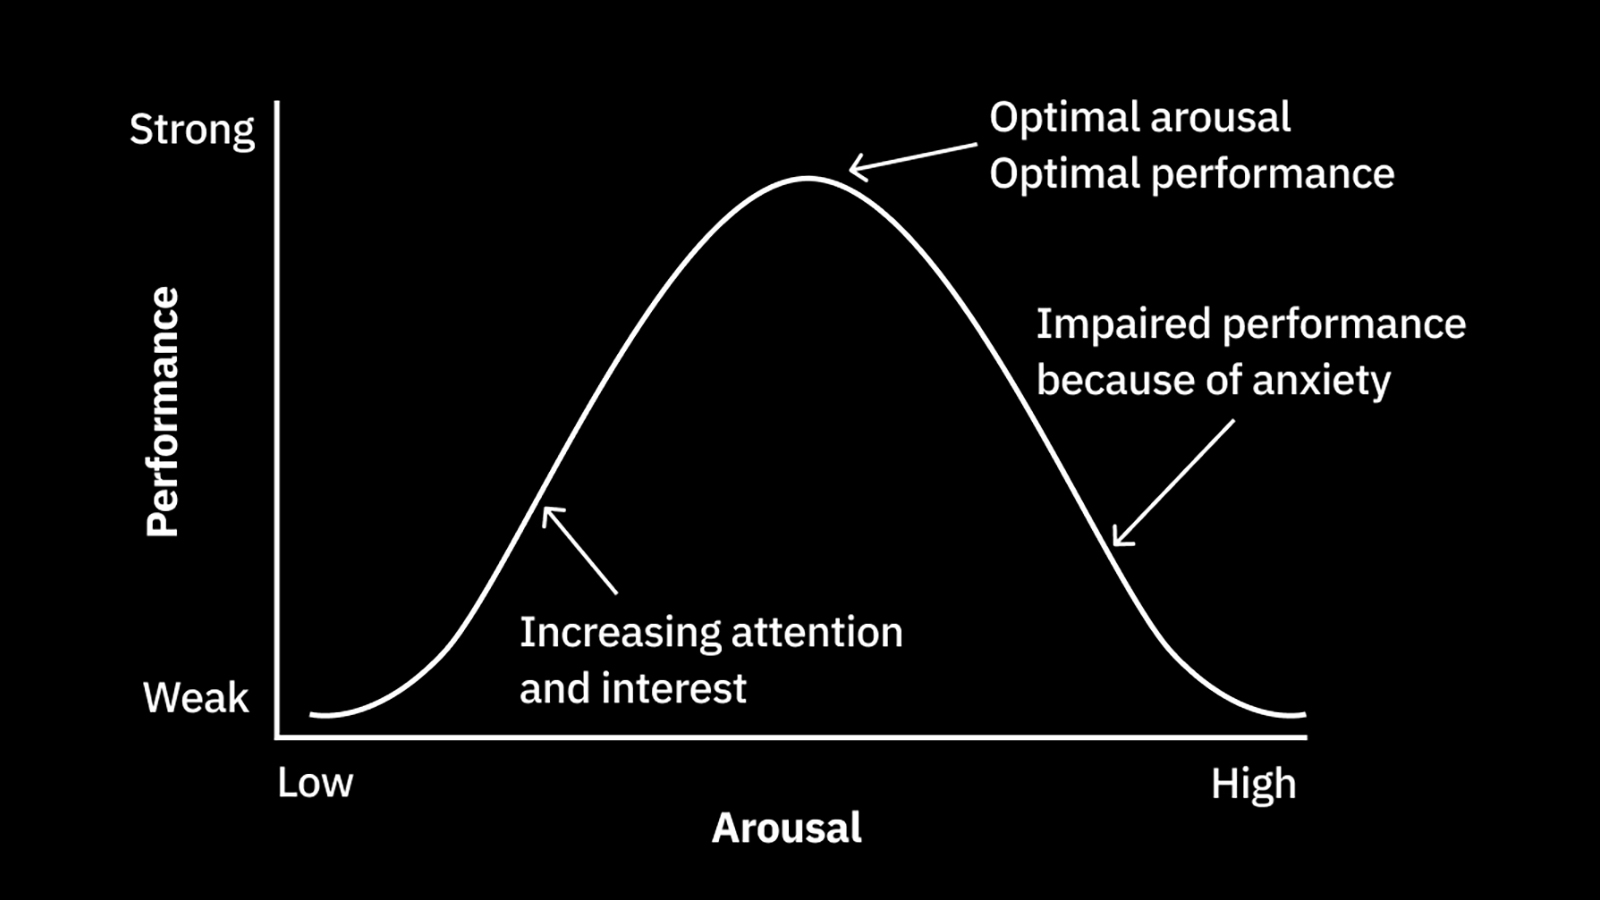 This graph will change your relationship to stress management